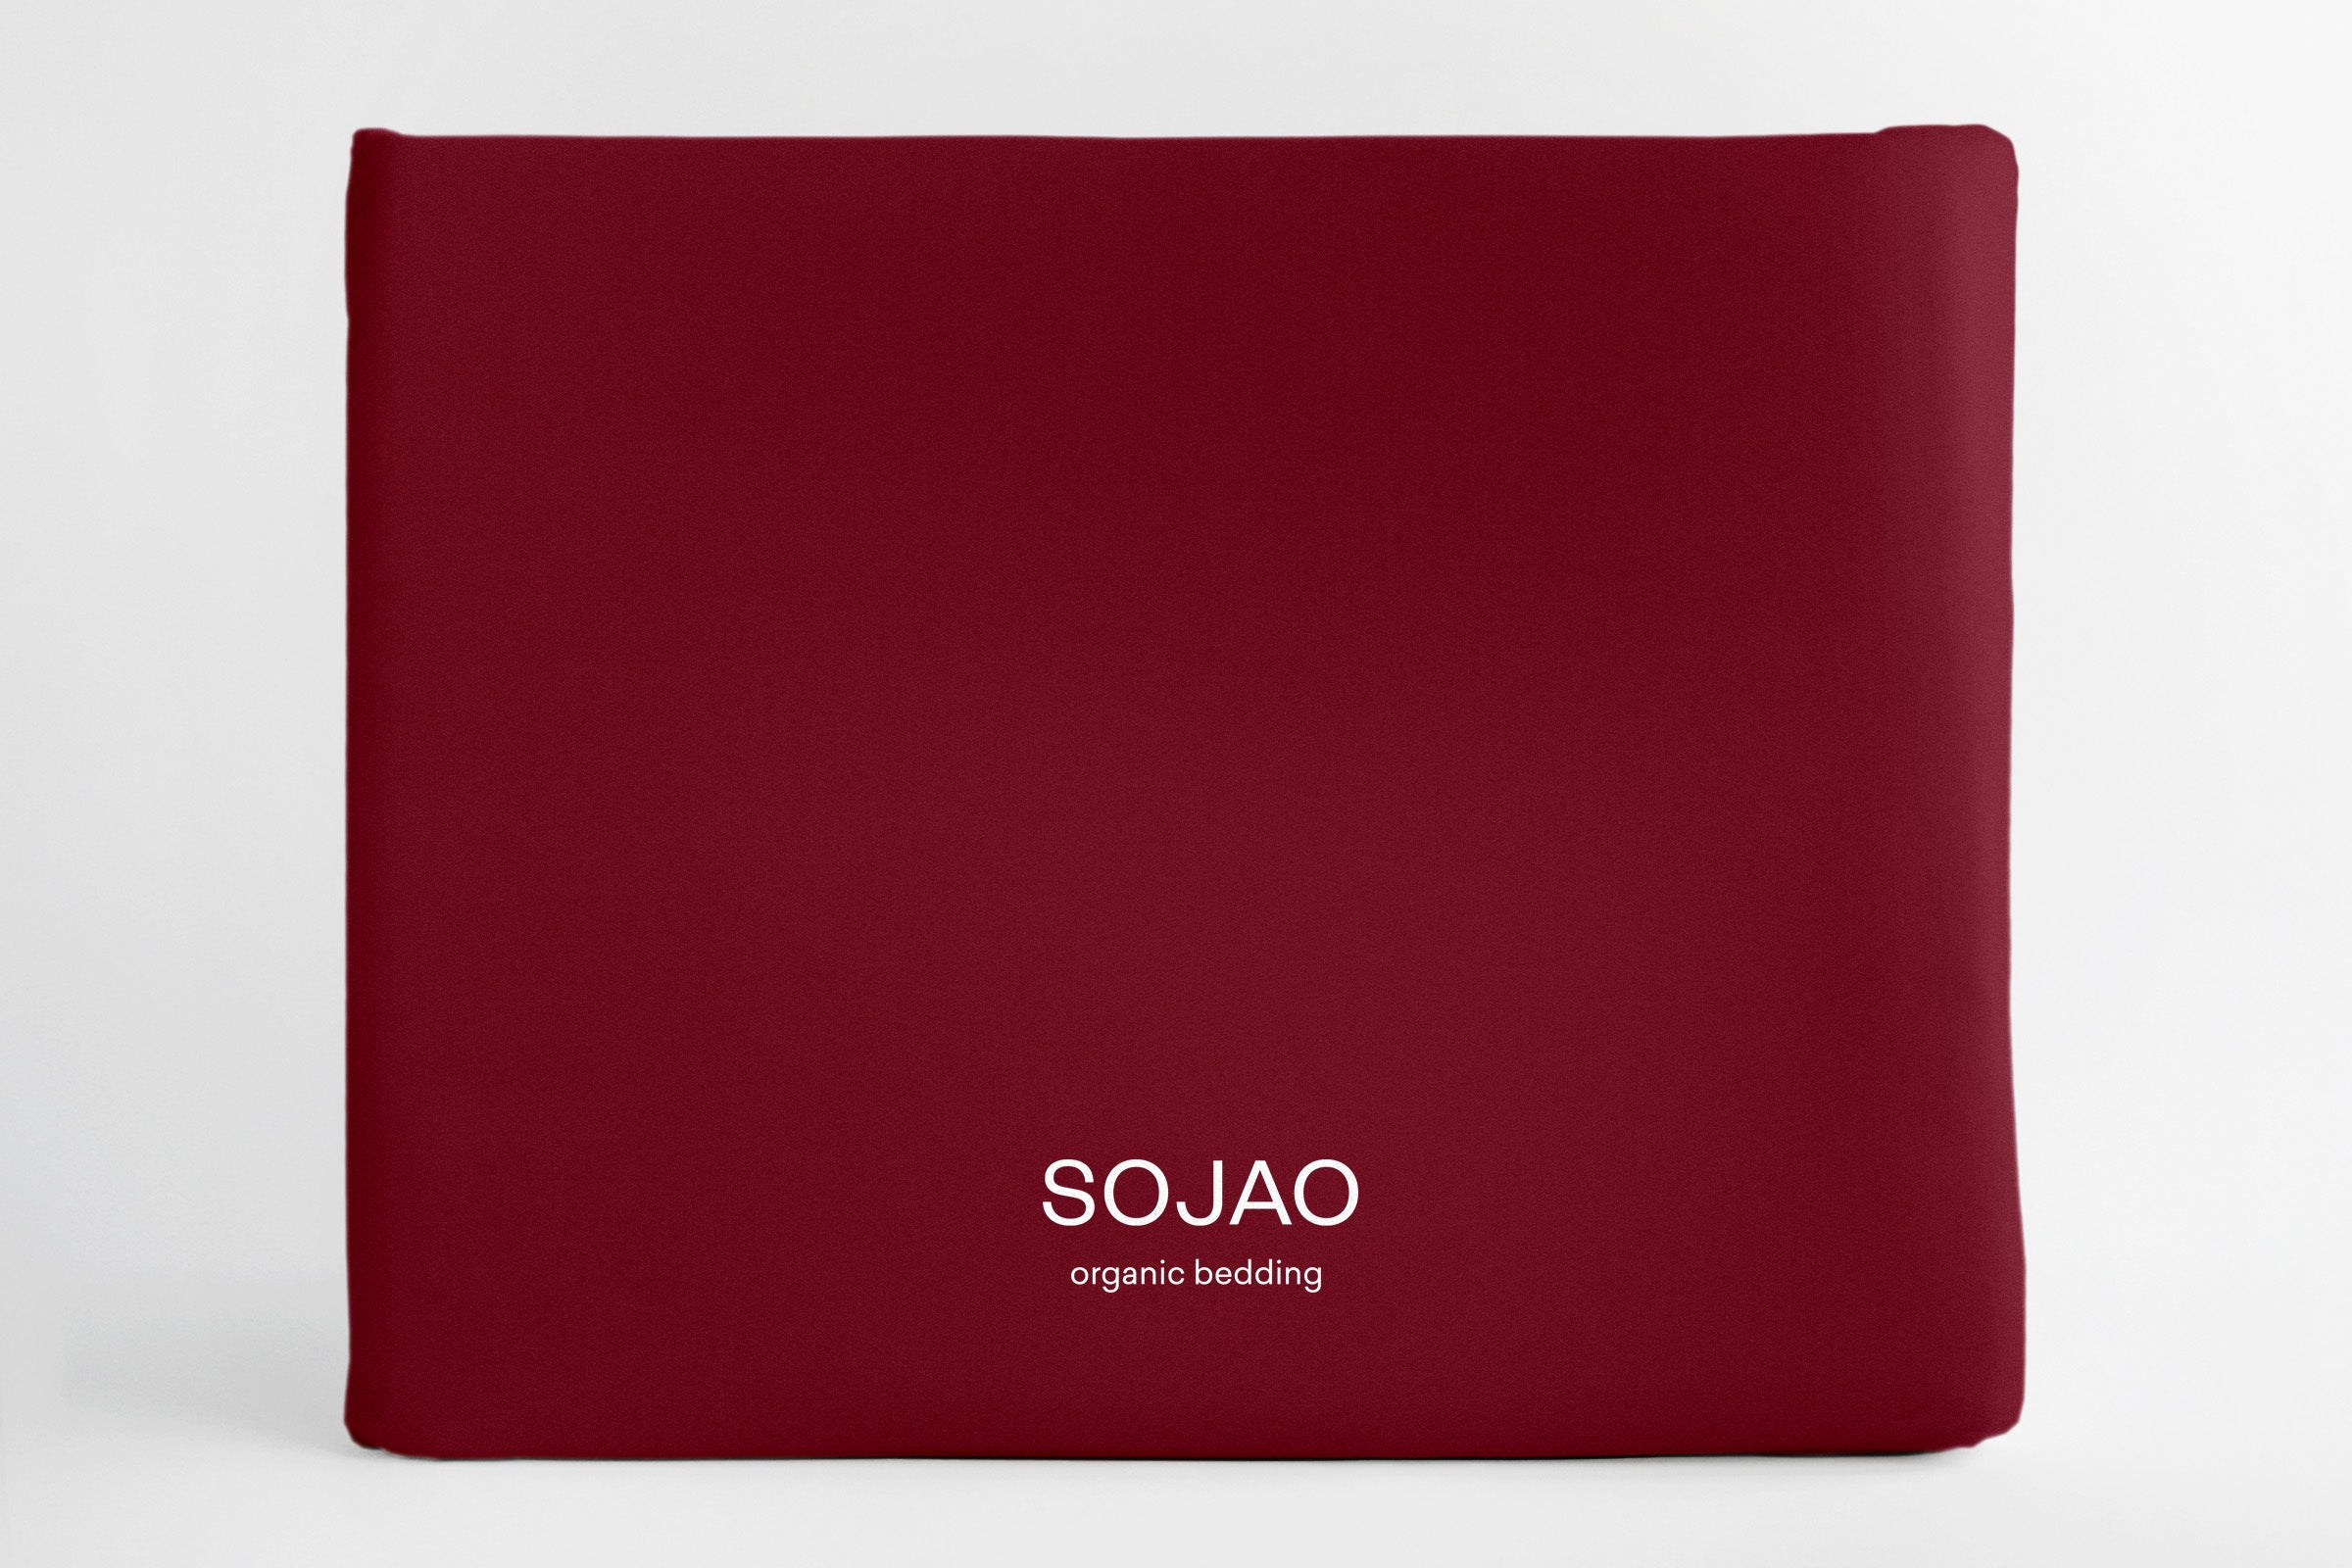 classic-wine-body-pillow-case-dust-bag-by-sojao.jpg